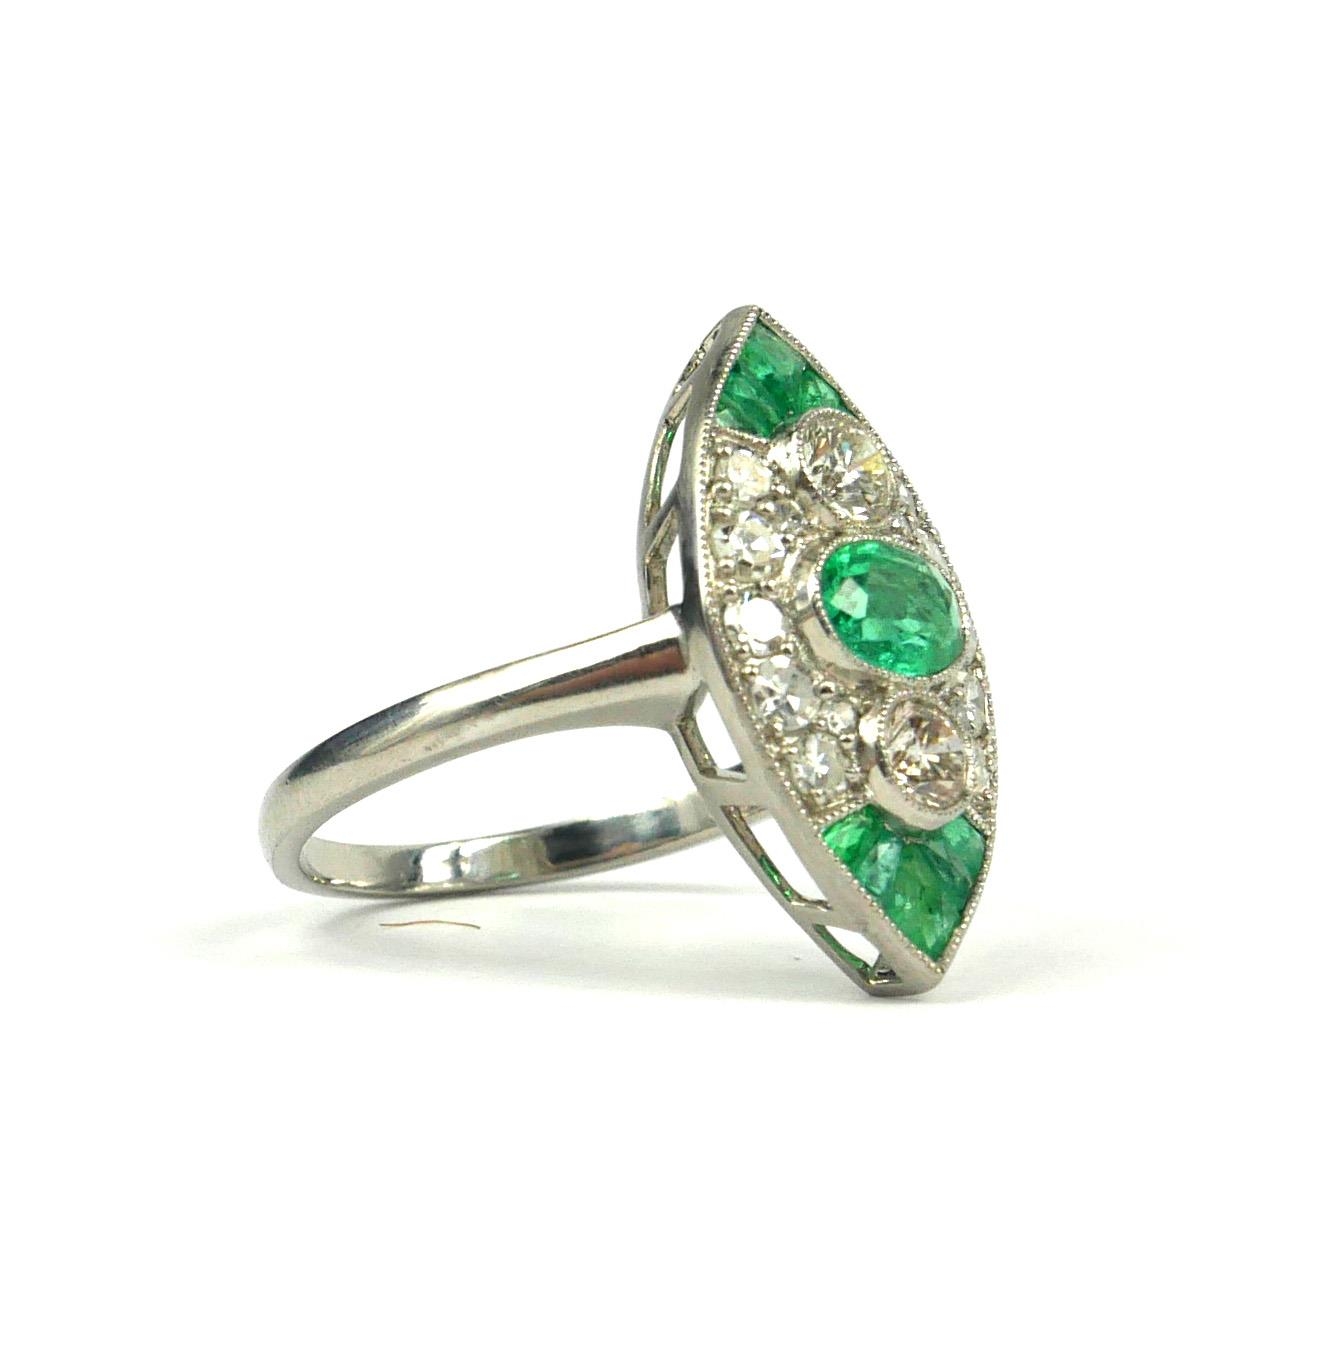 A PLATINUM ART DECO STYLE MARQUISE SHAPED RING SET WITH EMERALDS AND DIAMONDS. (Approx Emeralds 0. - Image 2 of 2